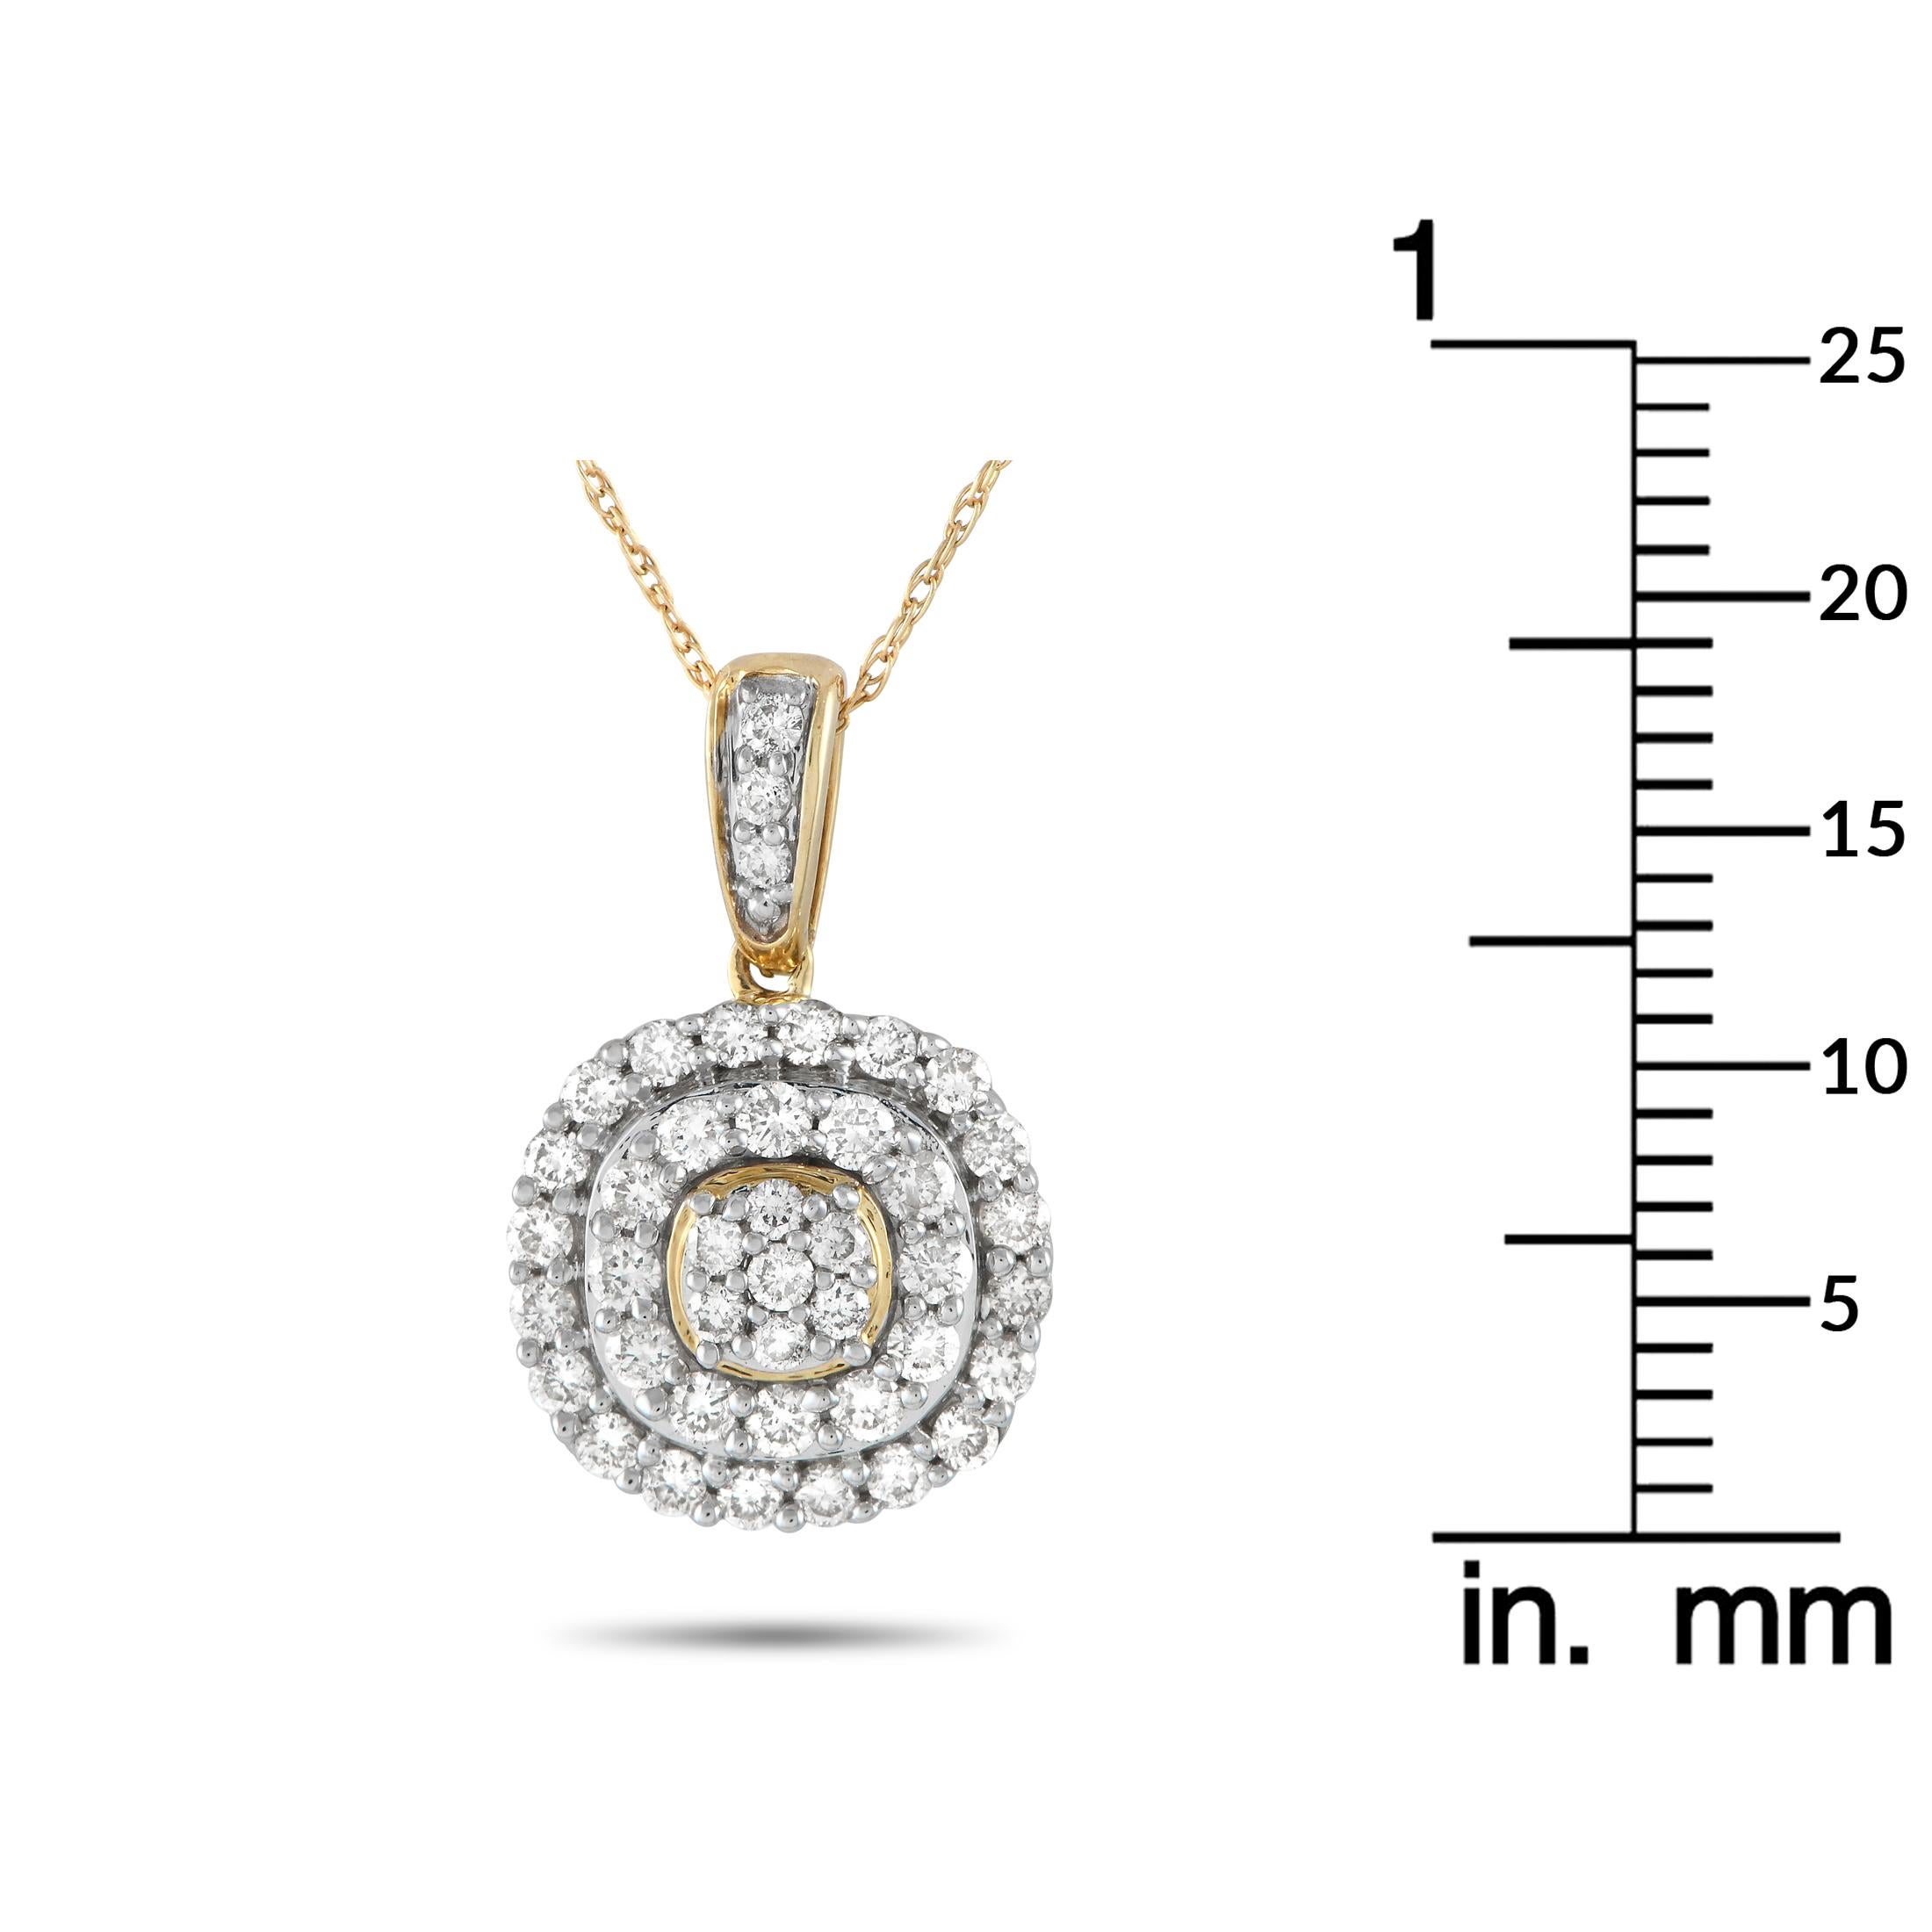 LB Exclusive 14K Yellow Gold 0.75ct Diamond Pendant Necklace PN-15056 In New Condition For Sale In Southampton, PA